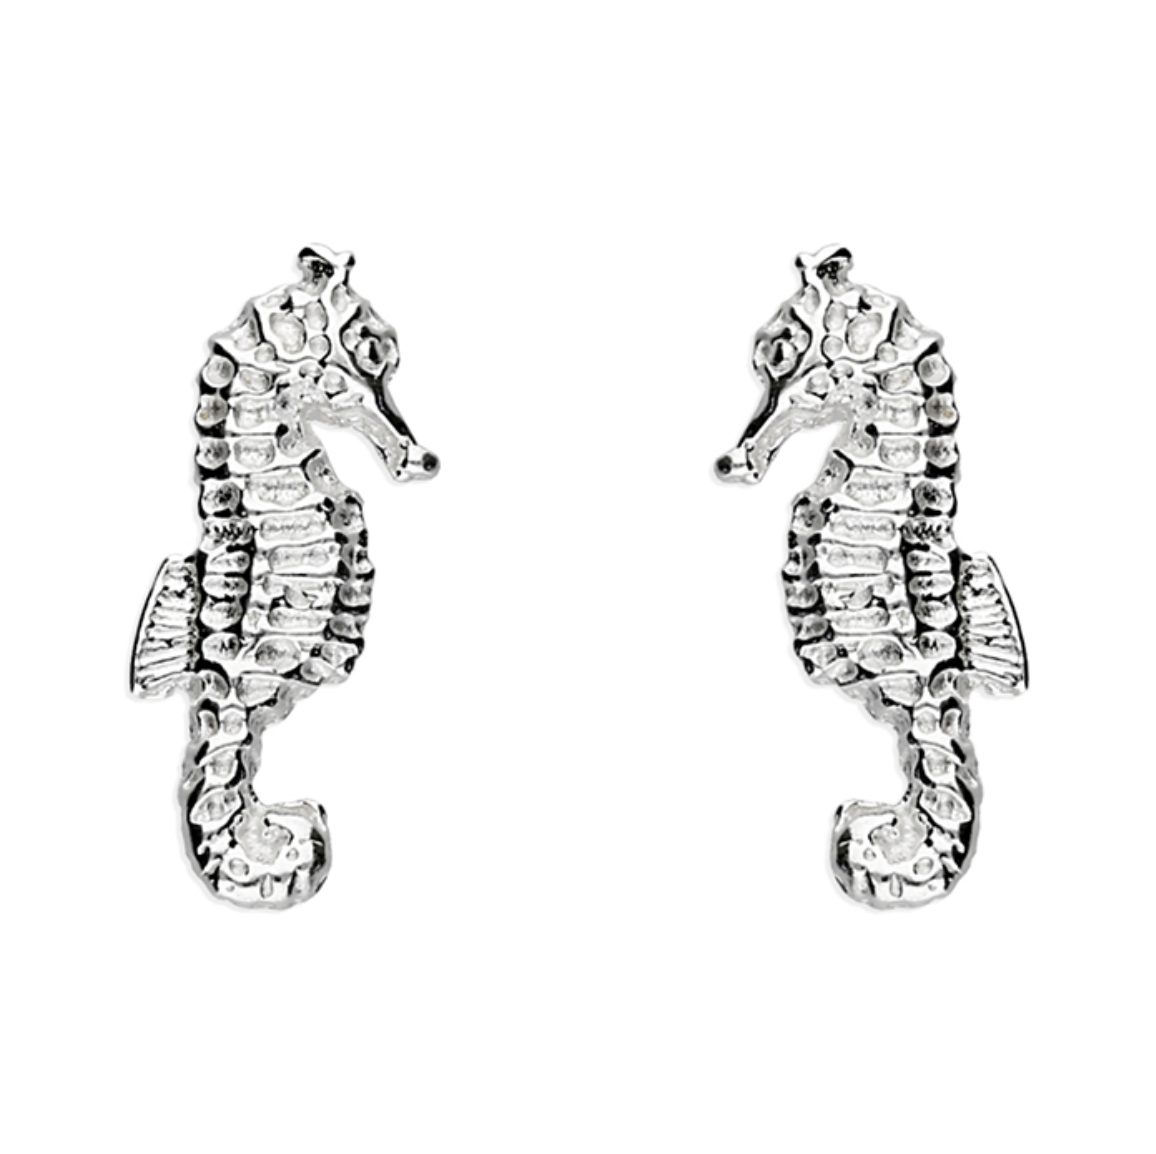 Tiny Seahorse Stud Earrings Sterling Silver